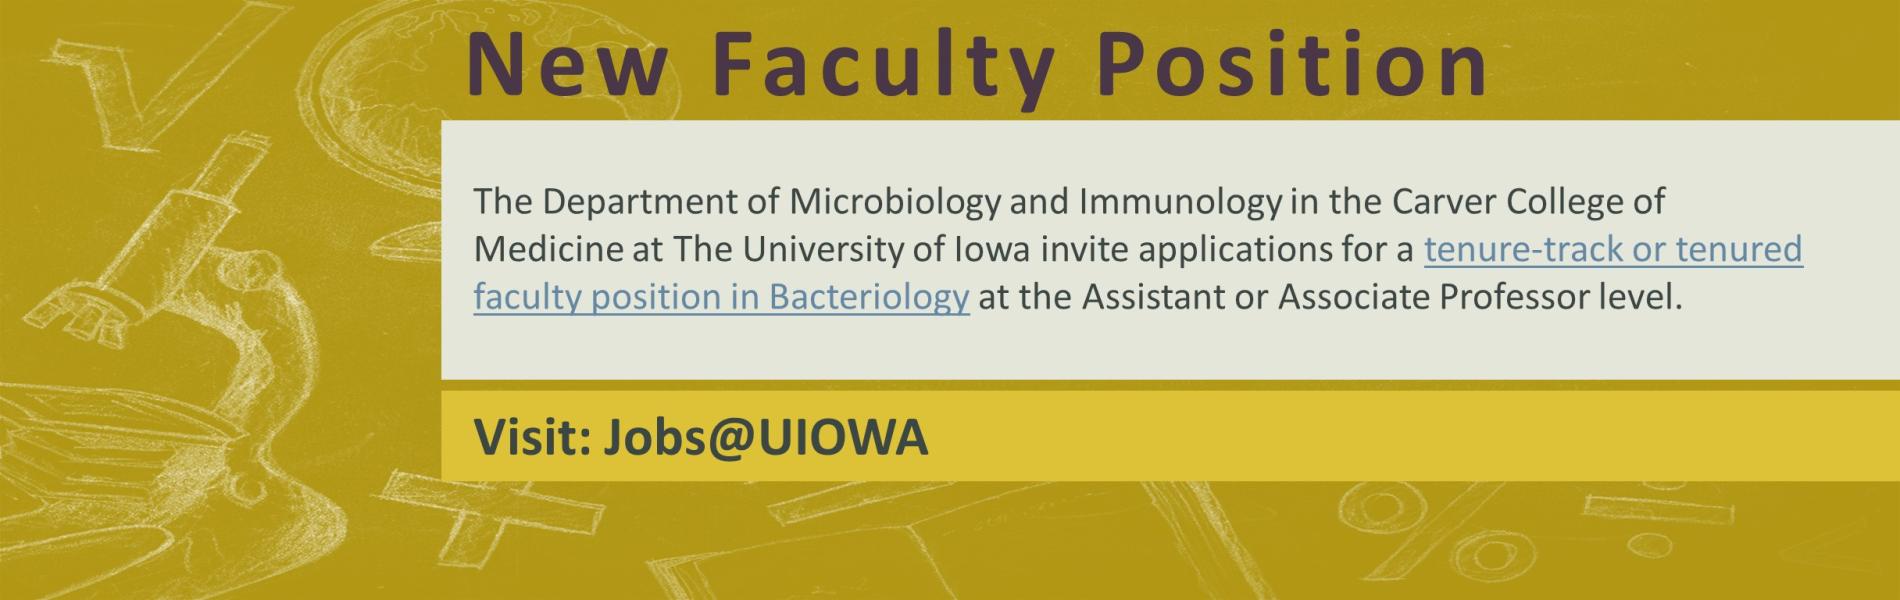 Faculty position opening